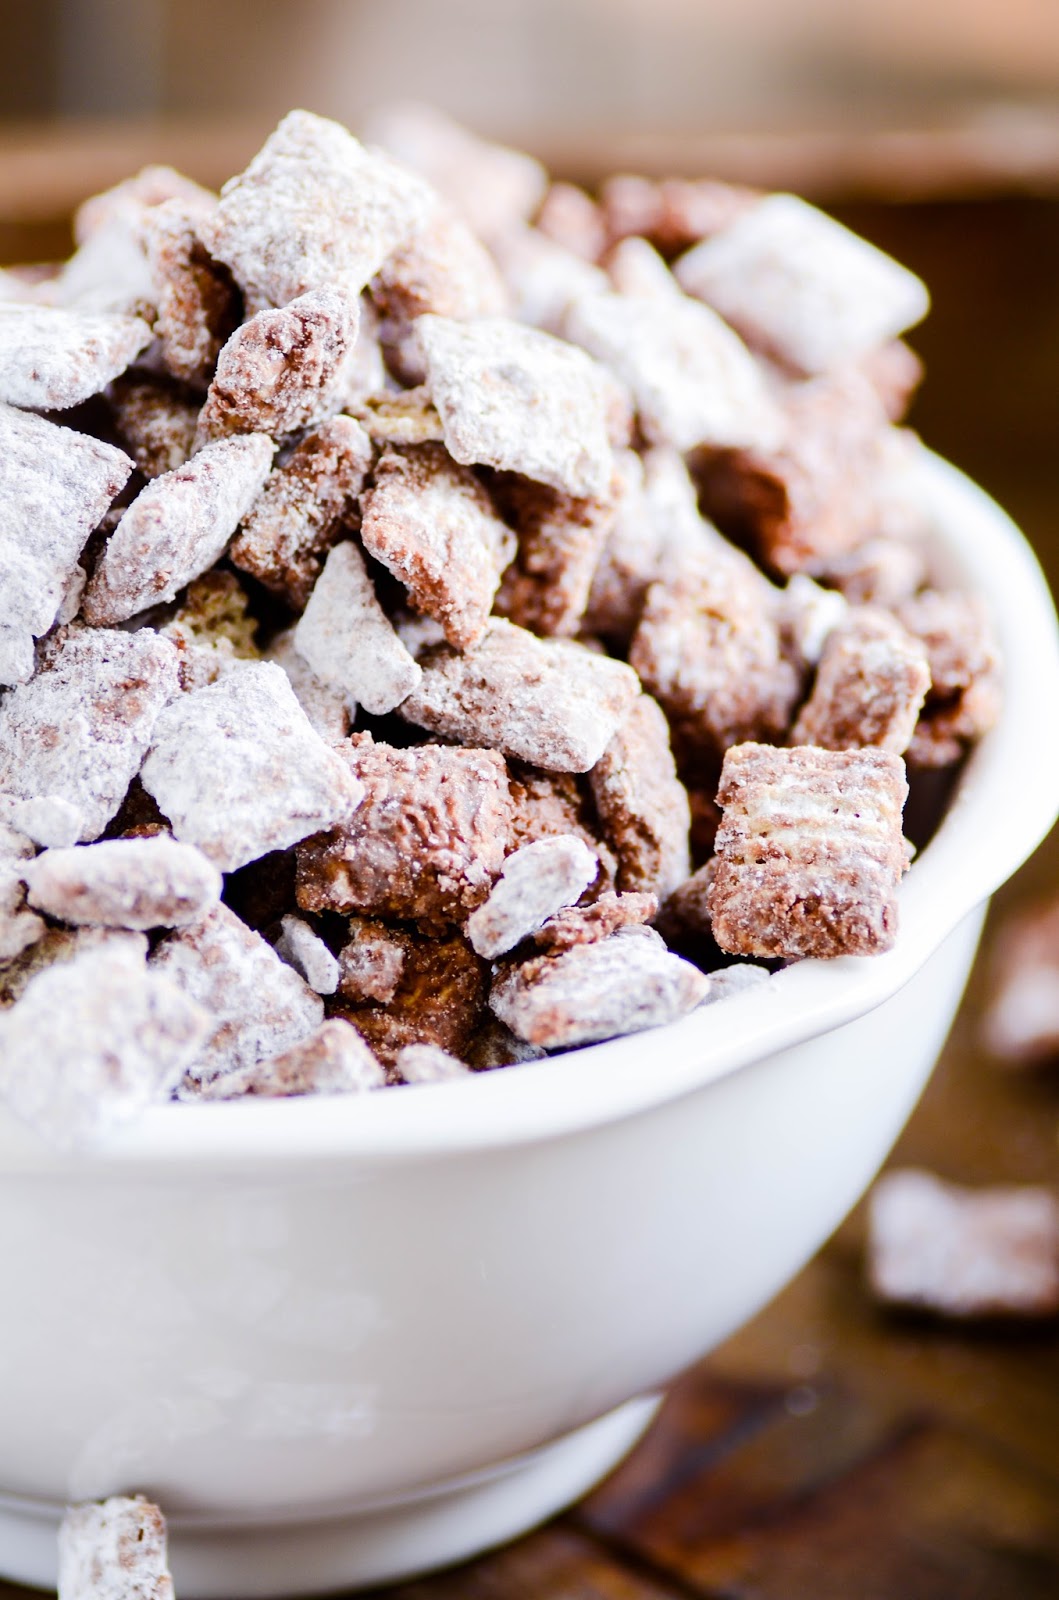 Muddy Buddies are one of my all-time favorite treats. Be sure to save this recipe, you won't want to lose it!